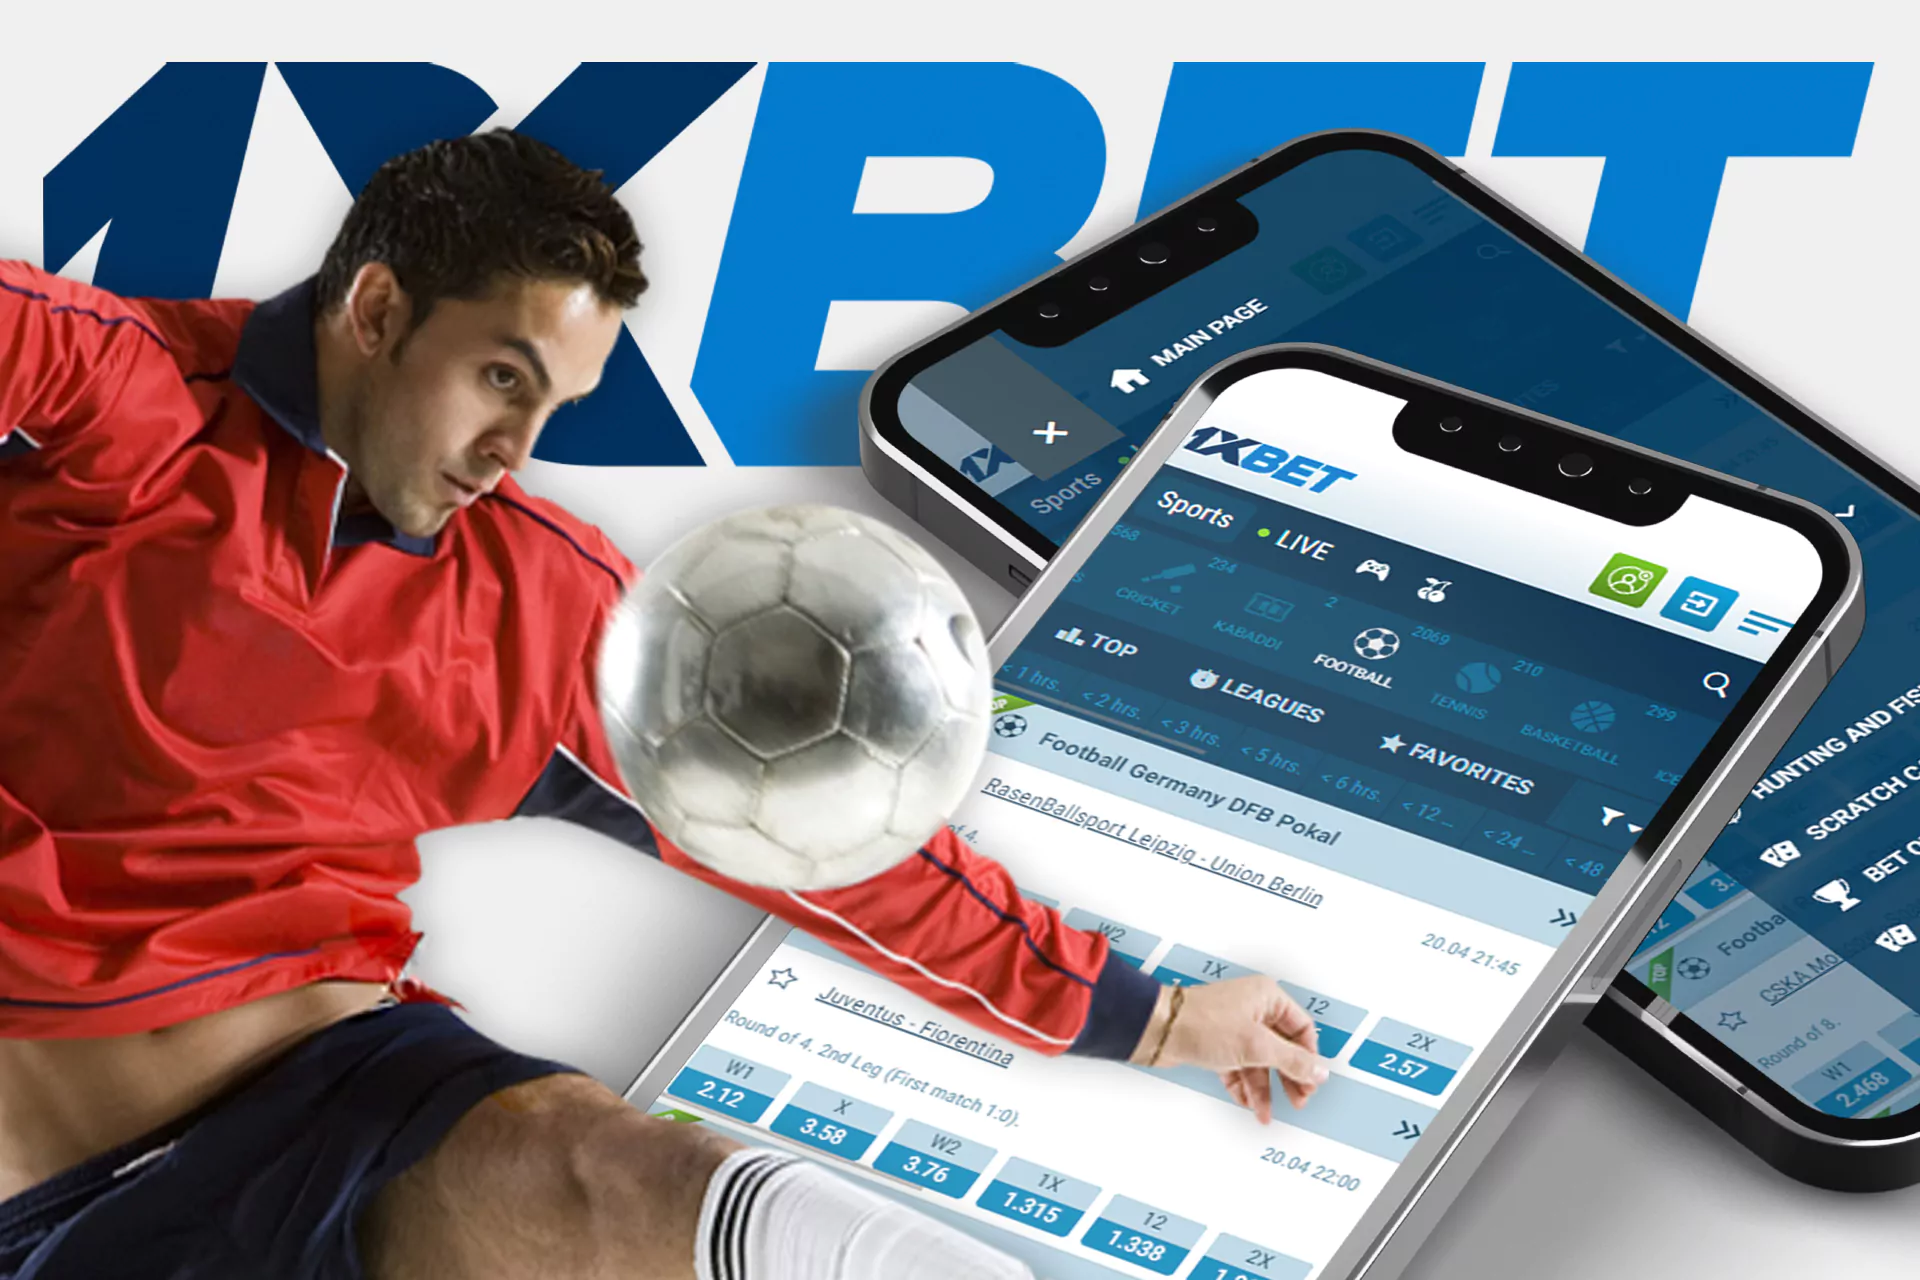 There are Android and iOS betting apps for users who have a smartphone.